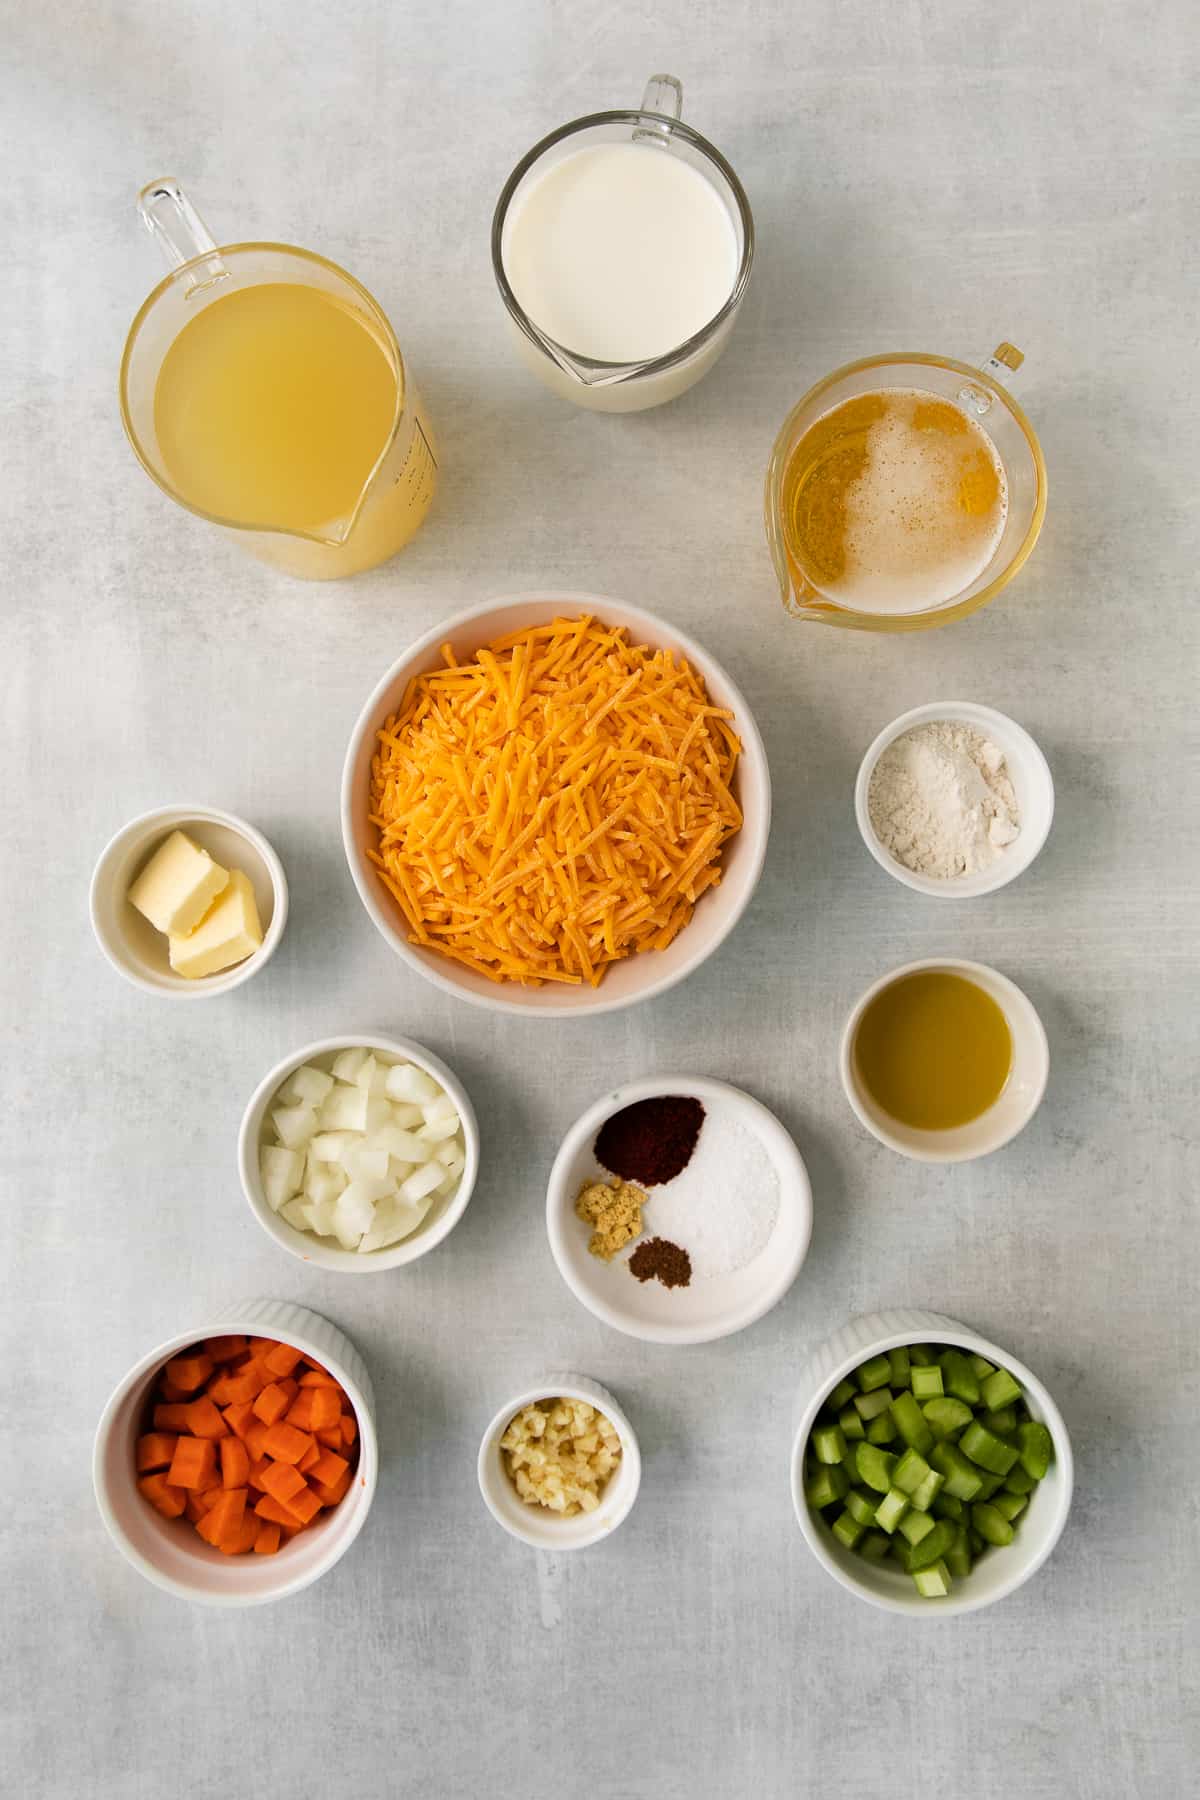 Ingredients for Wisconsin cheese soup.